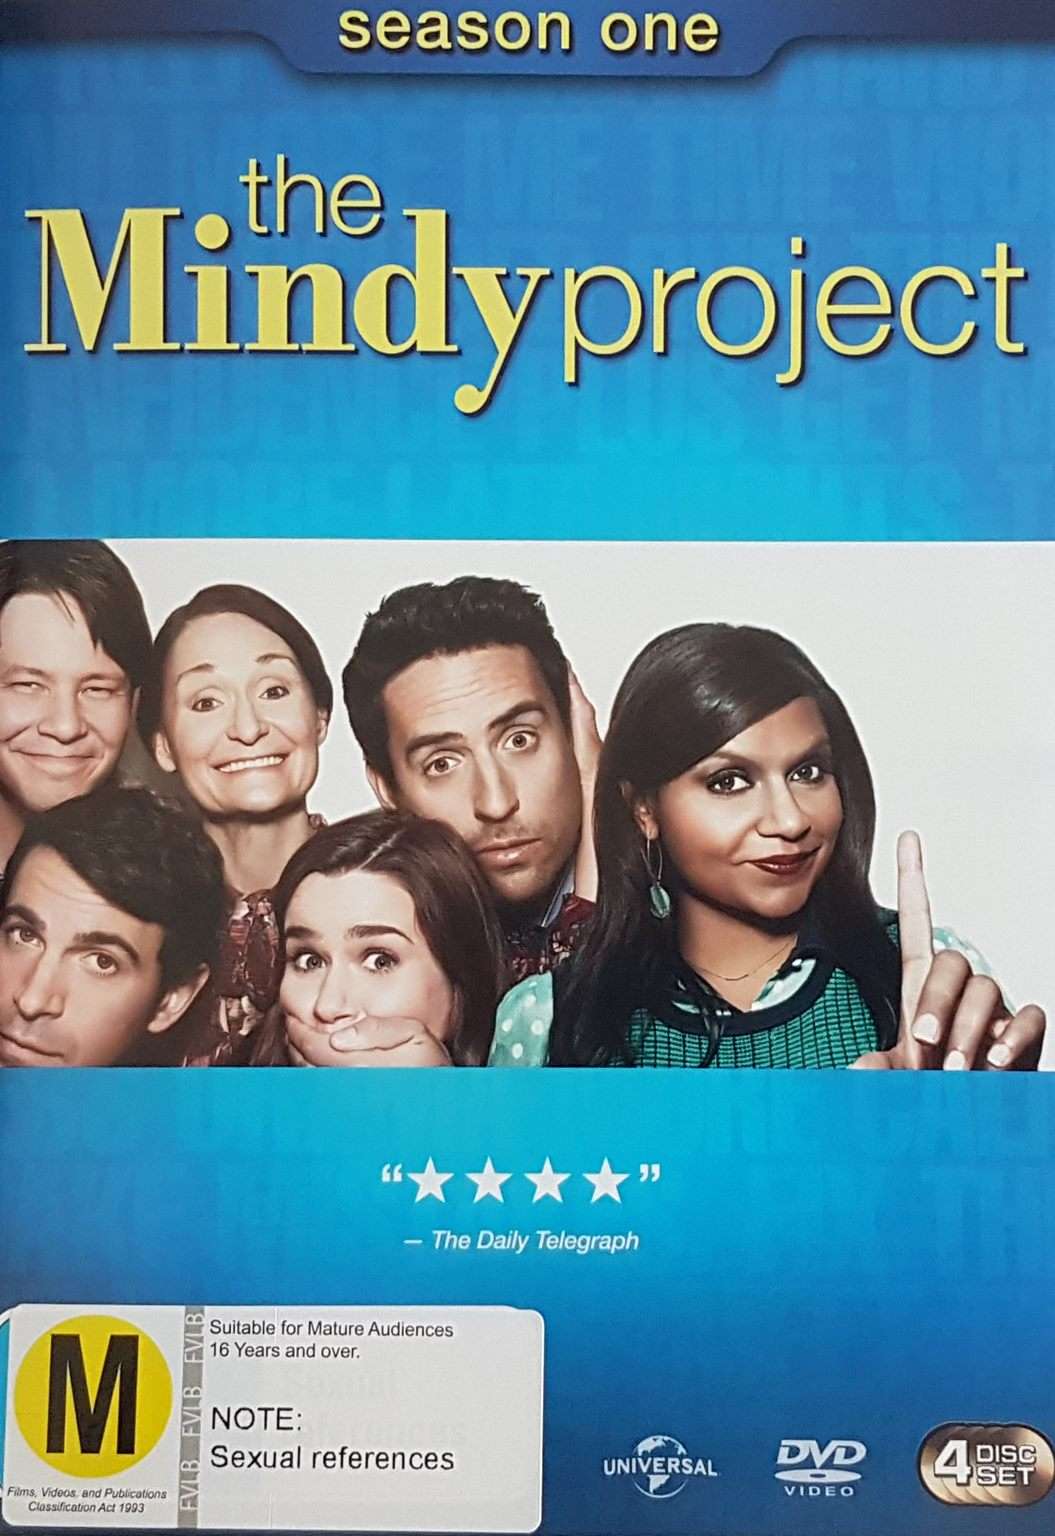 The Mindy Project Season One